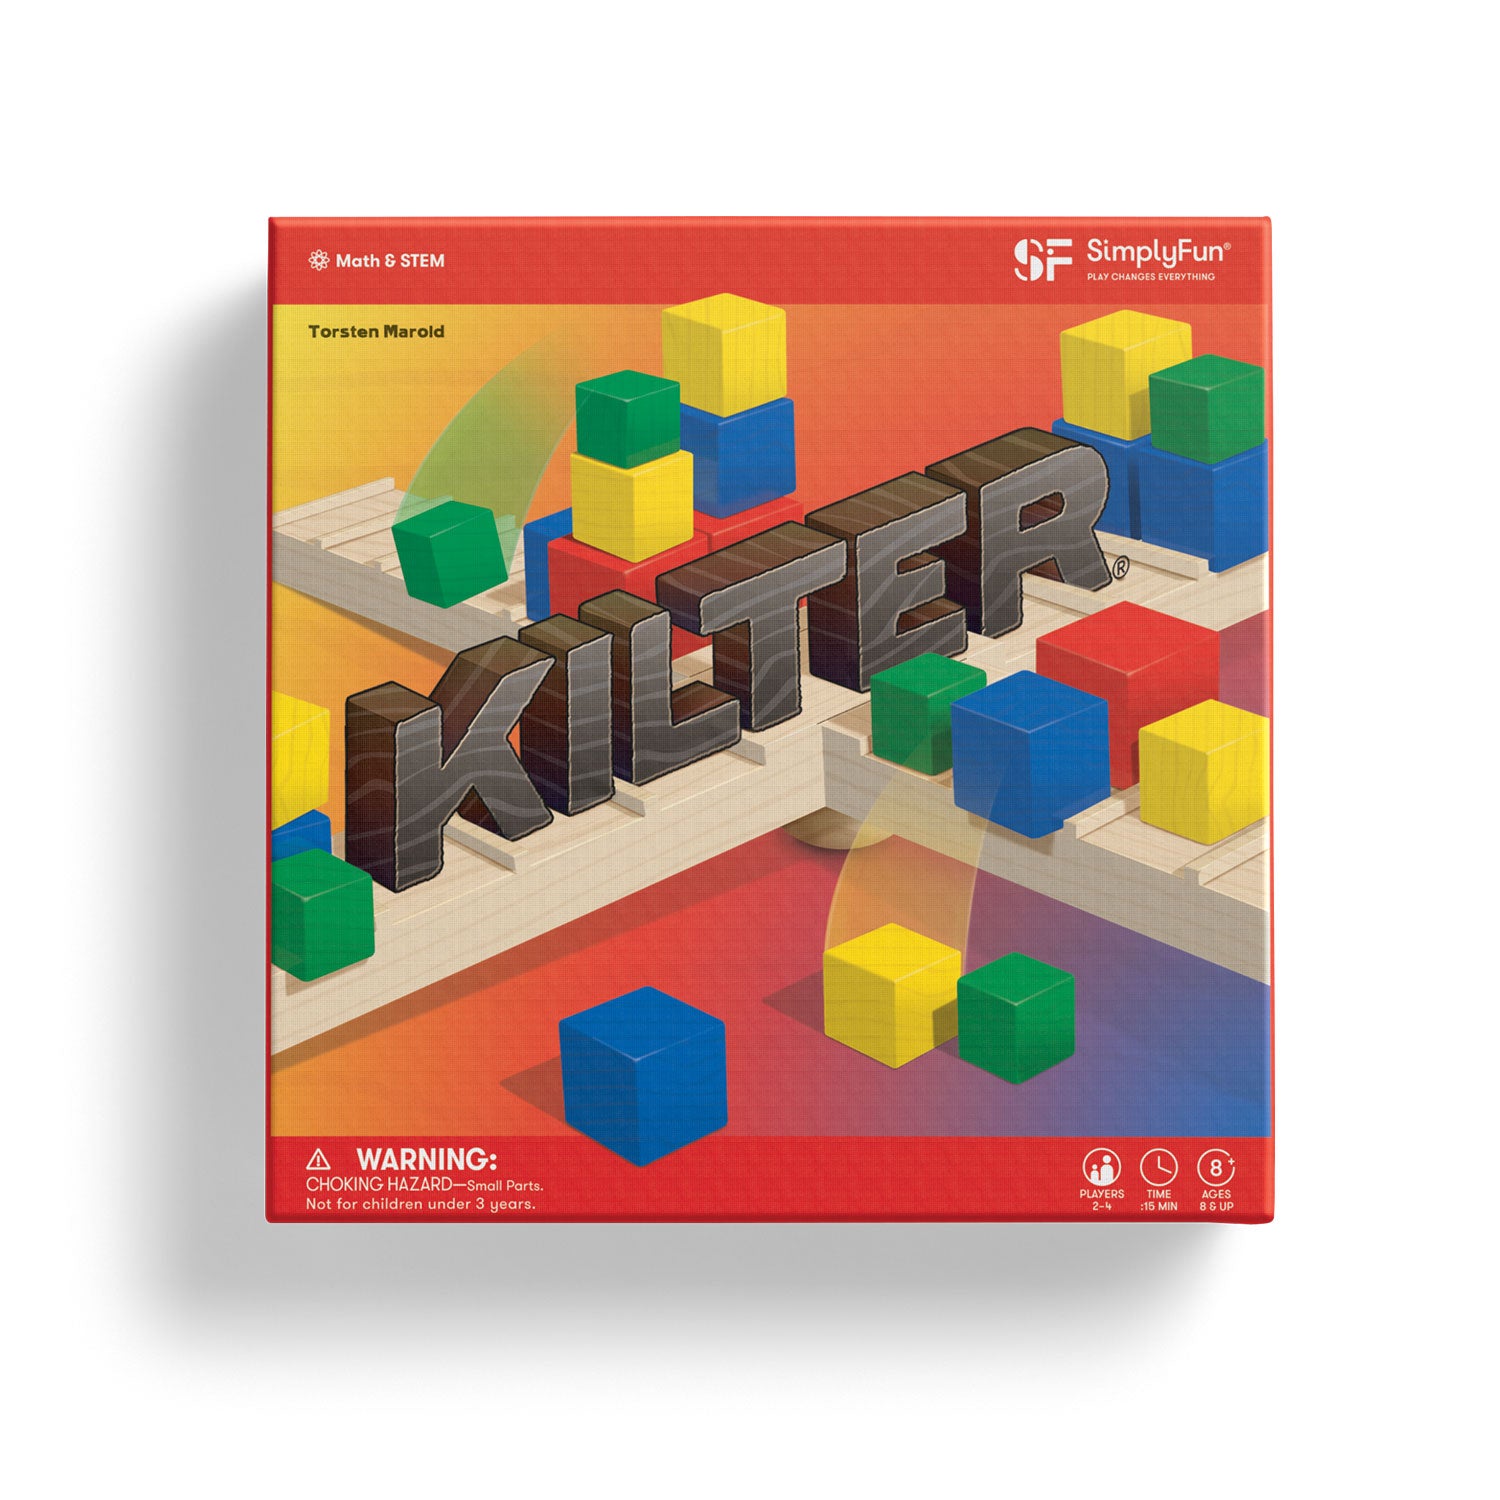 Kilter by SimplyFun is a physics game and family game for ages 8 and up.